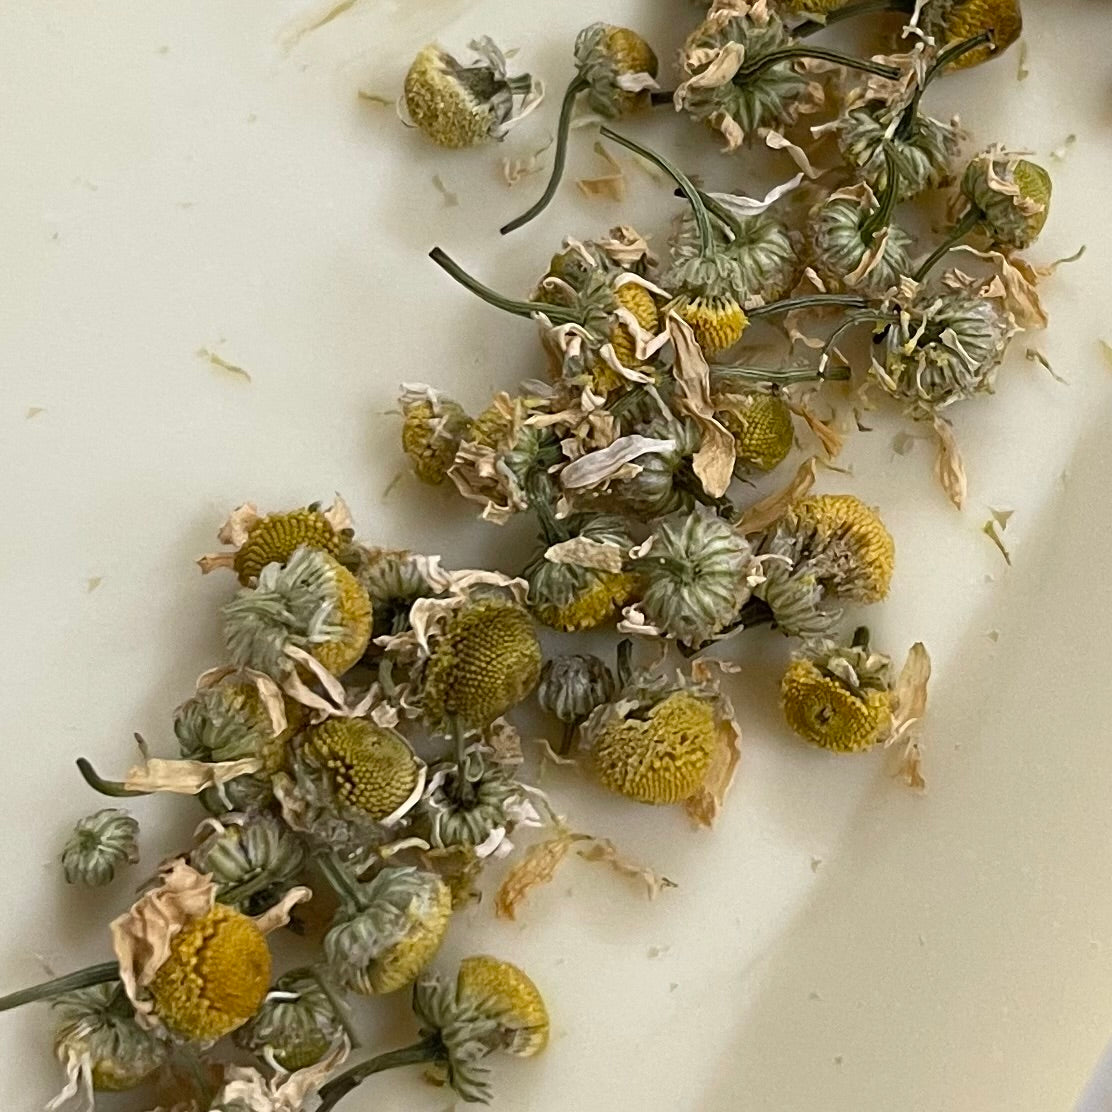 Chamomile Soap: Gentle and soothing for the skin